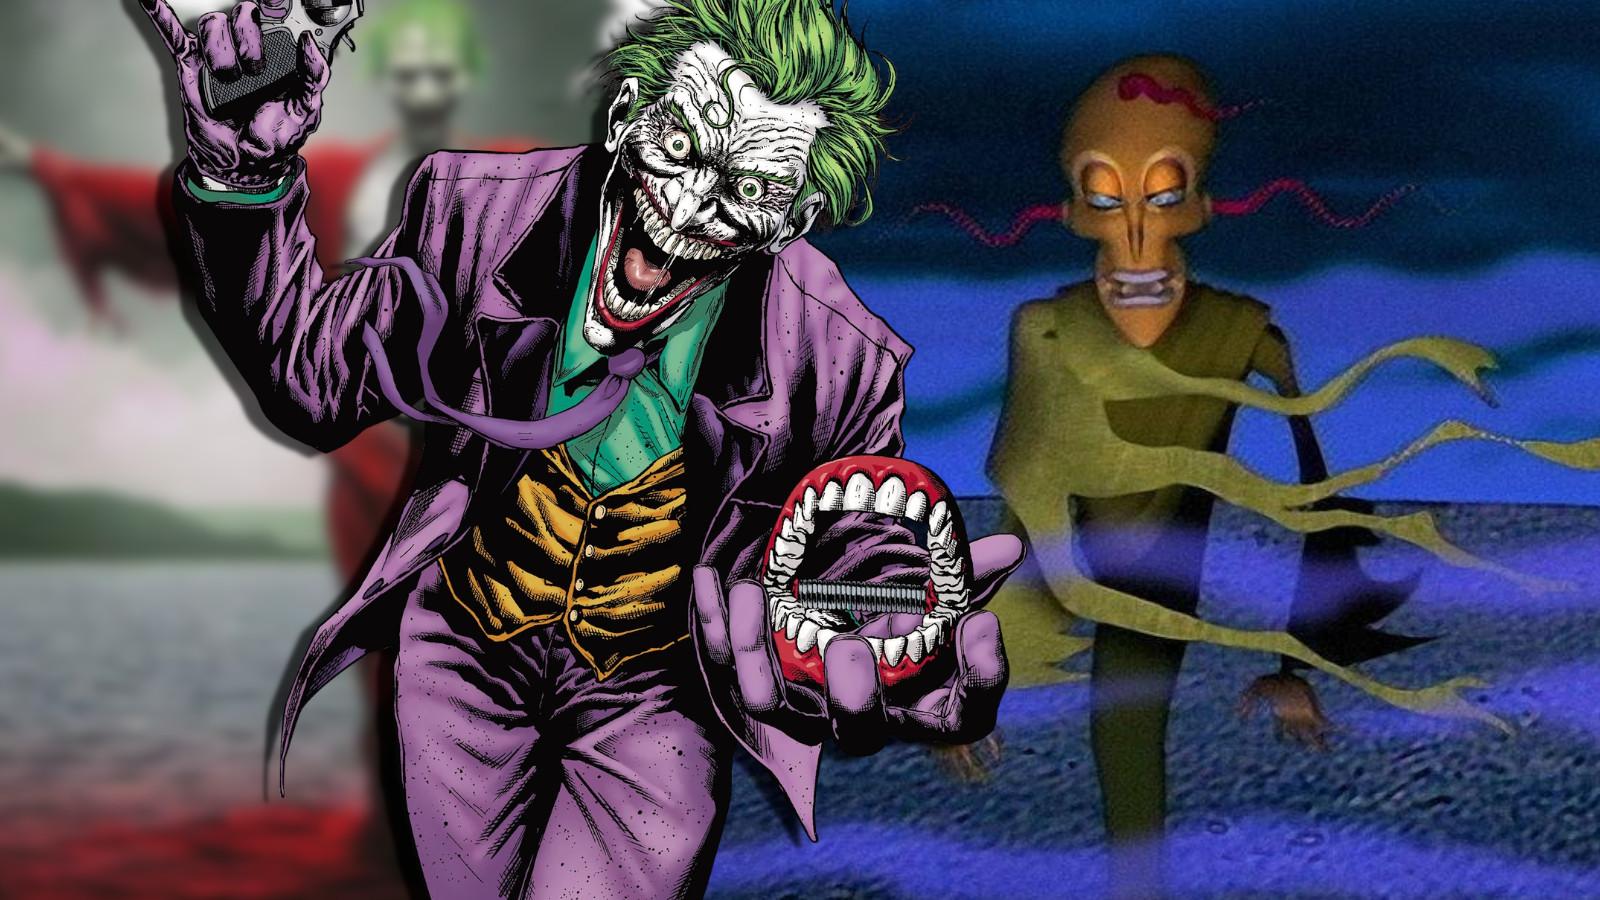 The Joker from DC Comics & King Ramses from Courage the Cowardly Dog